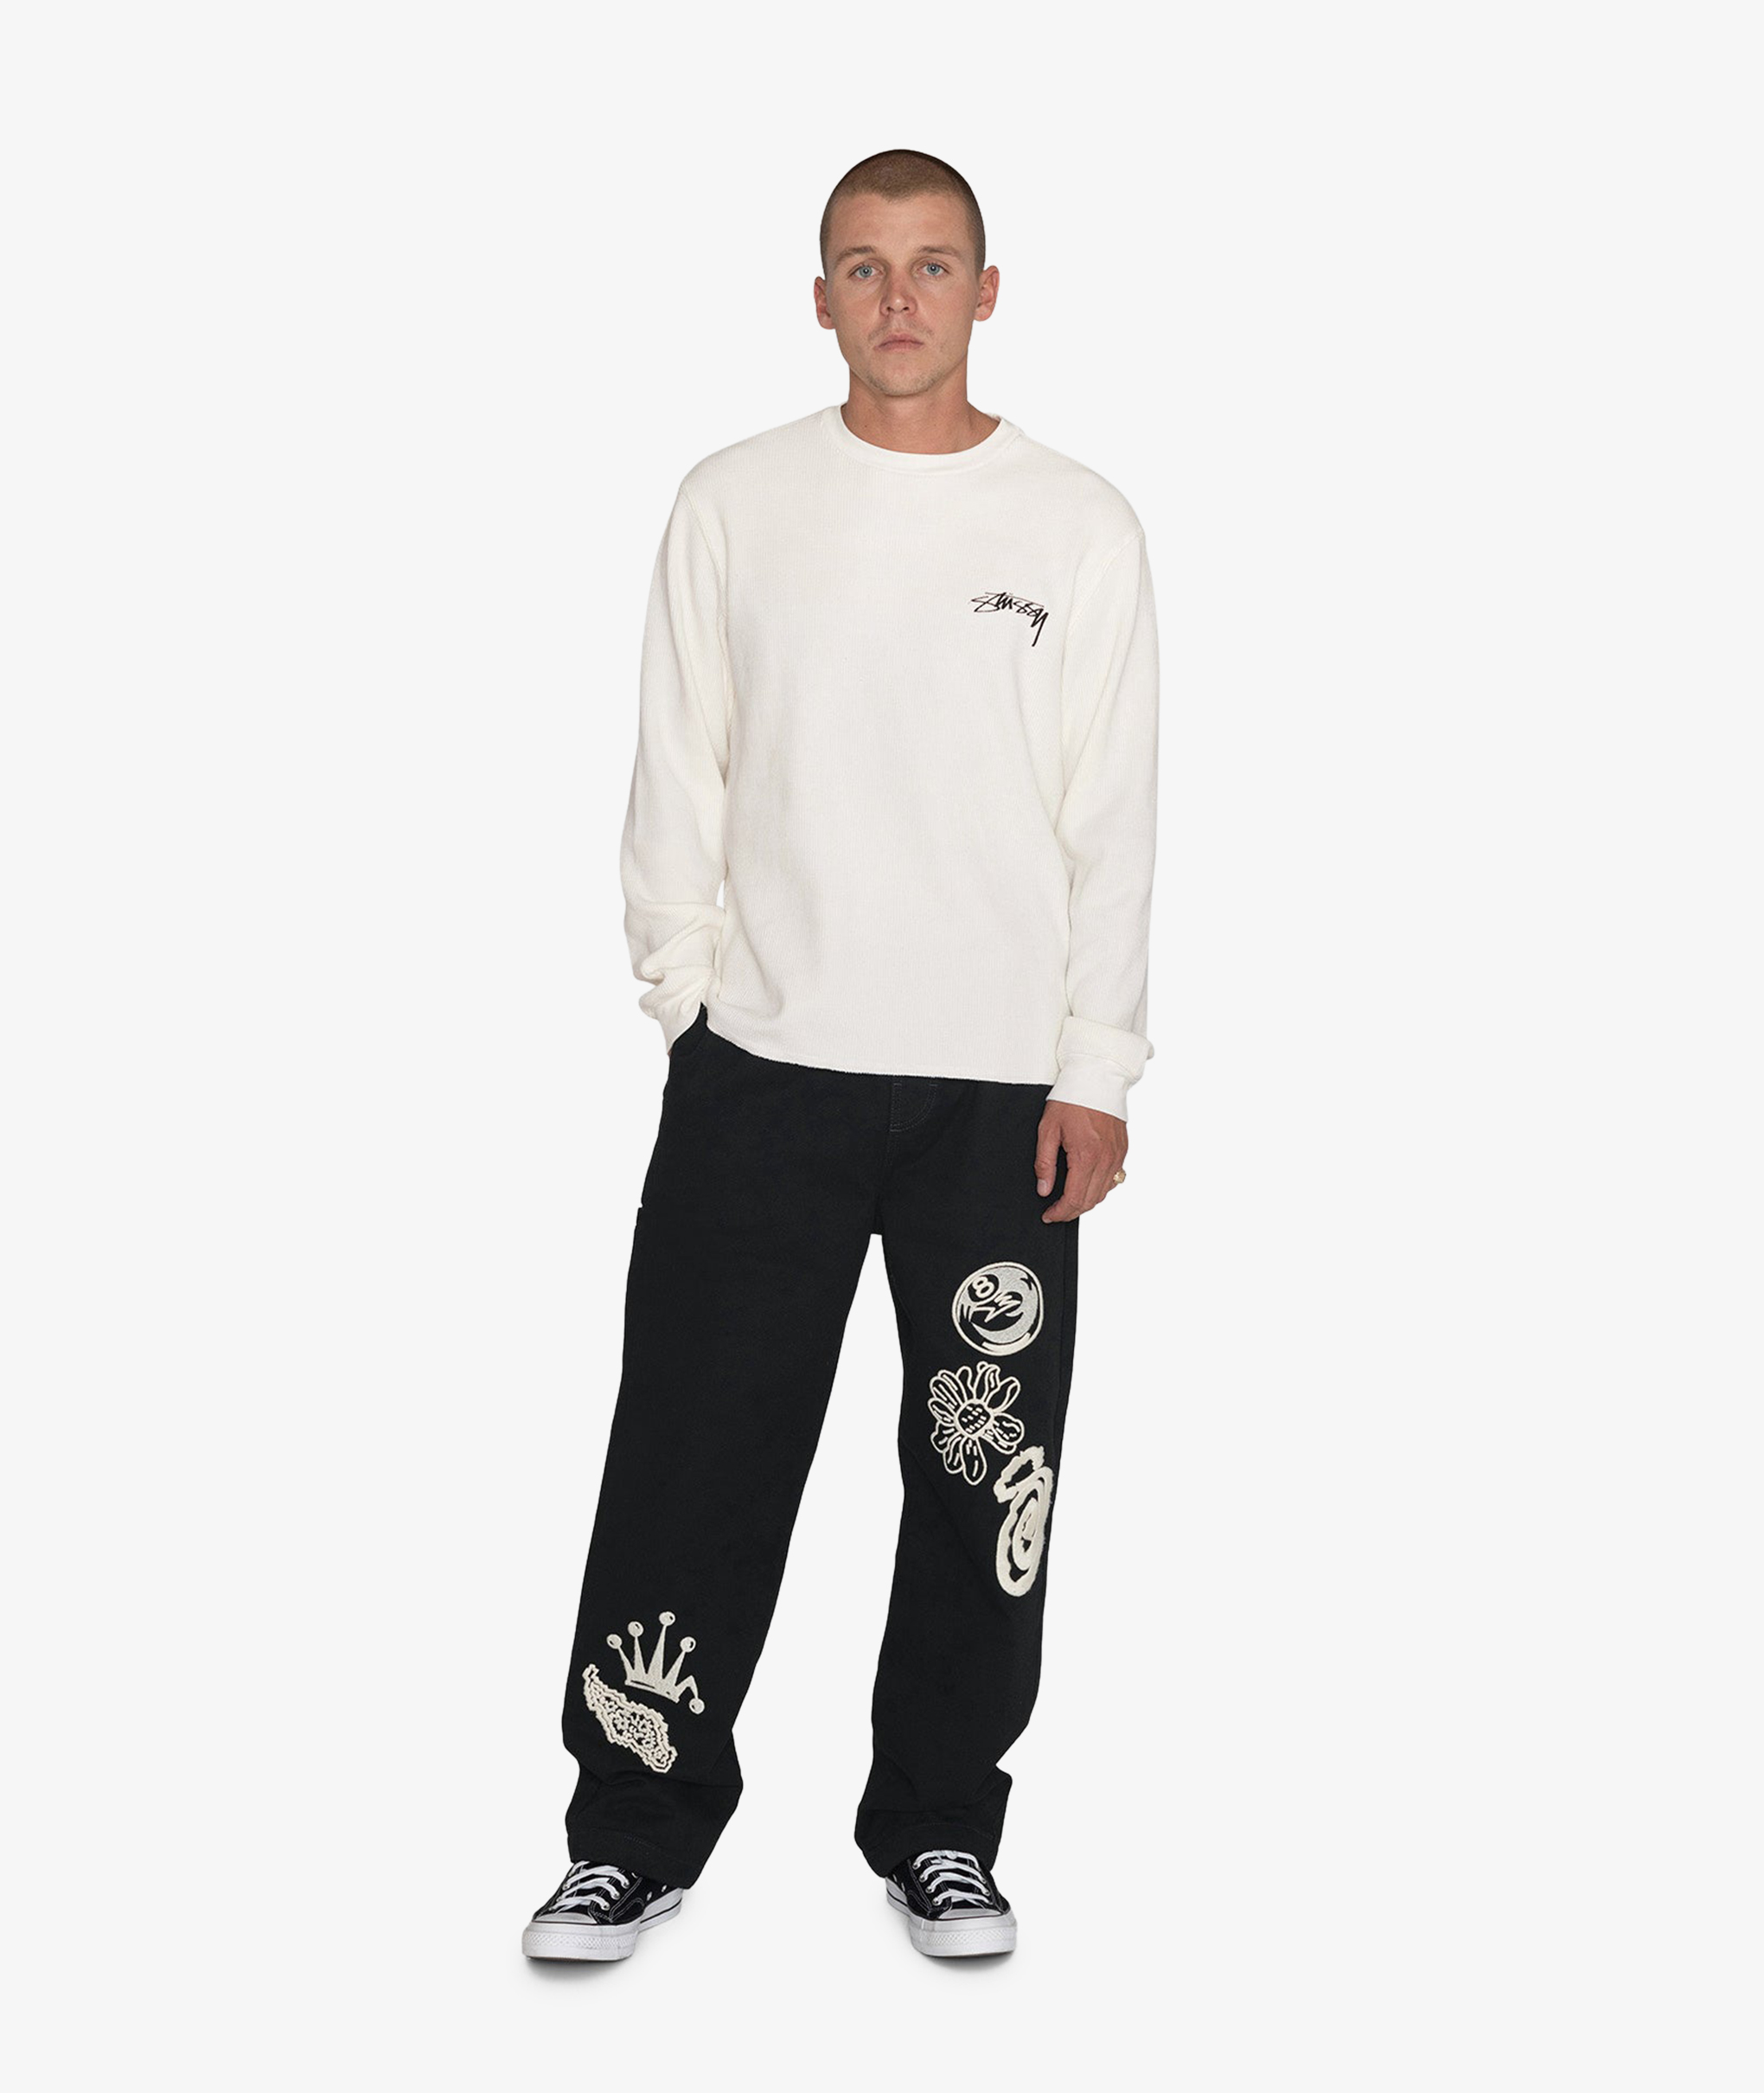 Norse Store | Shipping Worldwide - Stussy Noma Icon Beach Pant